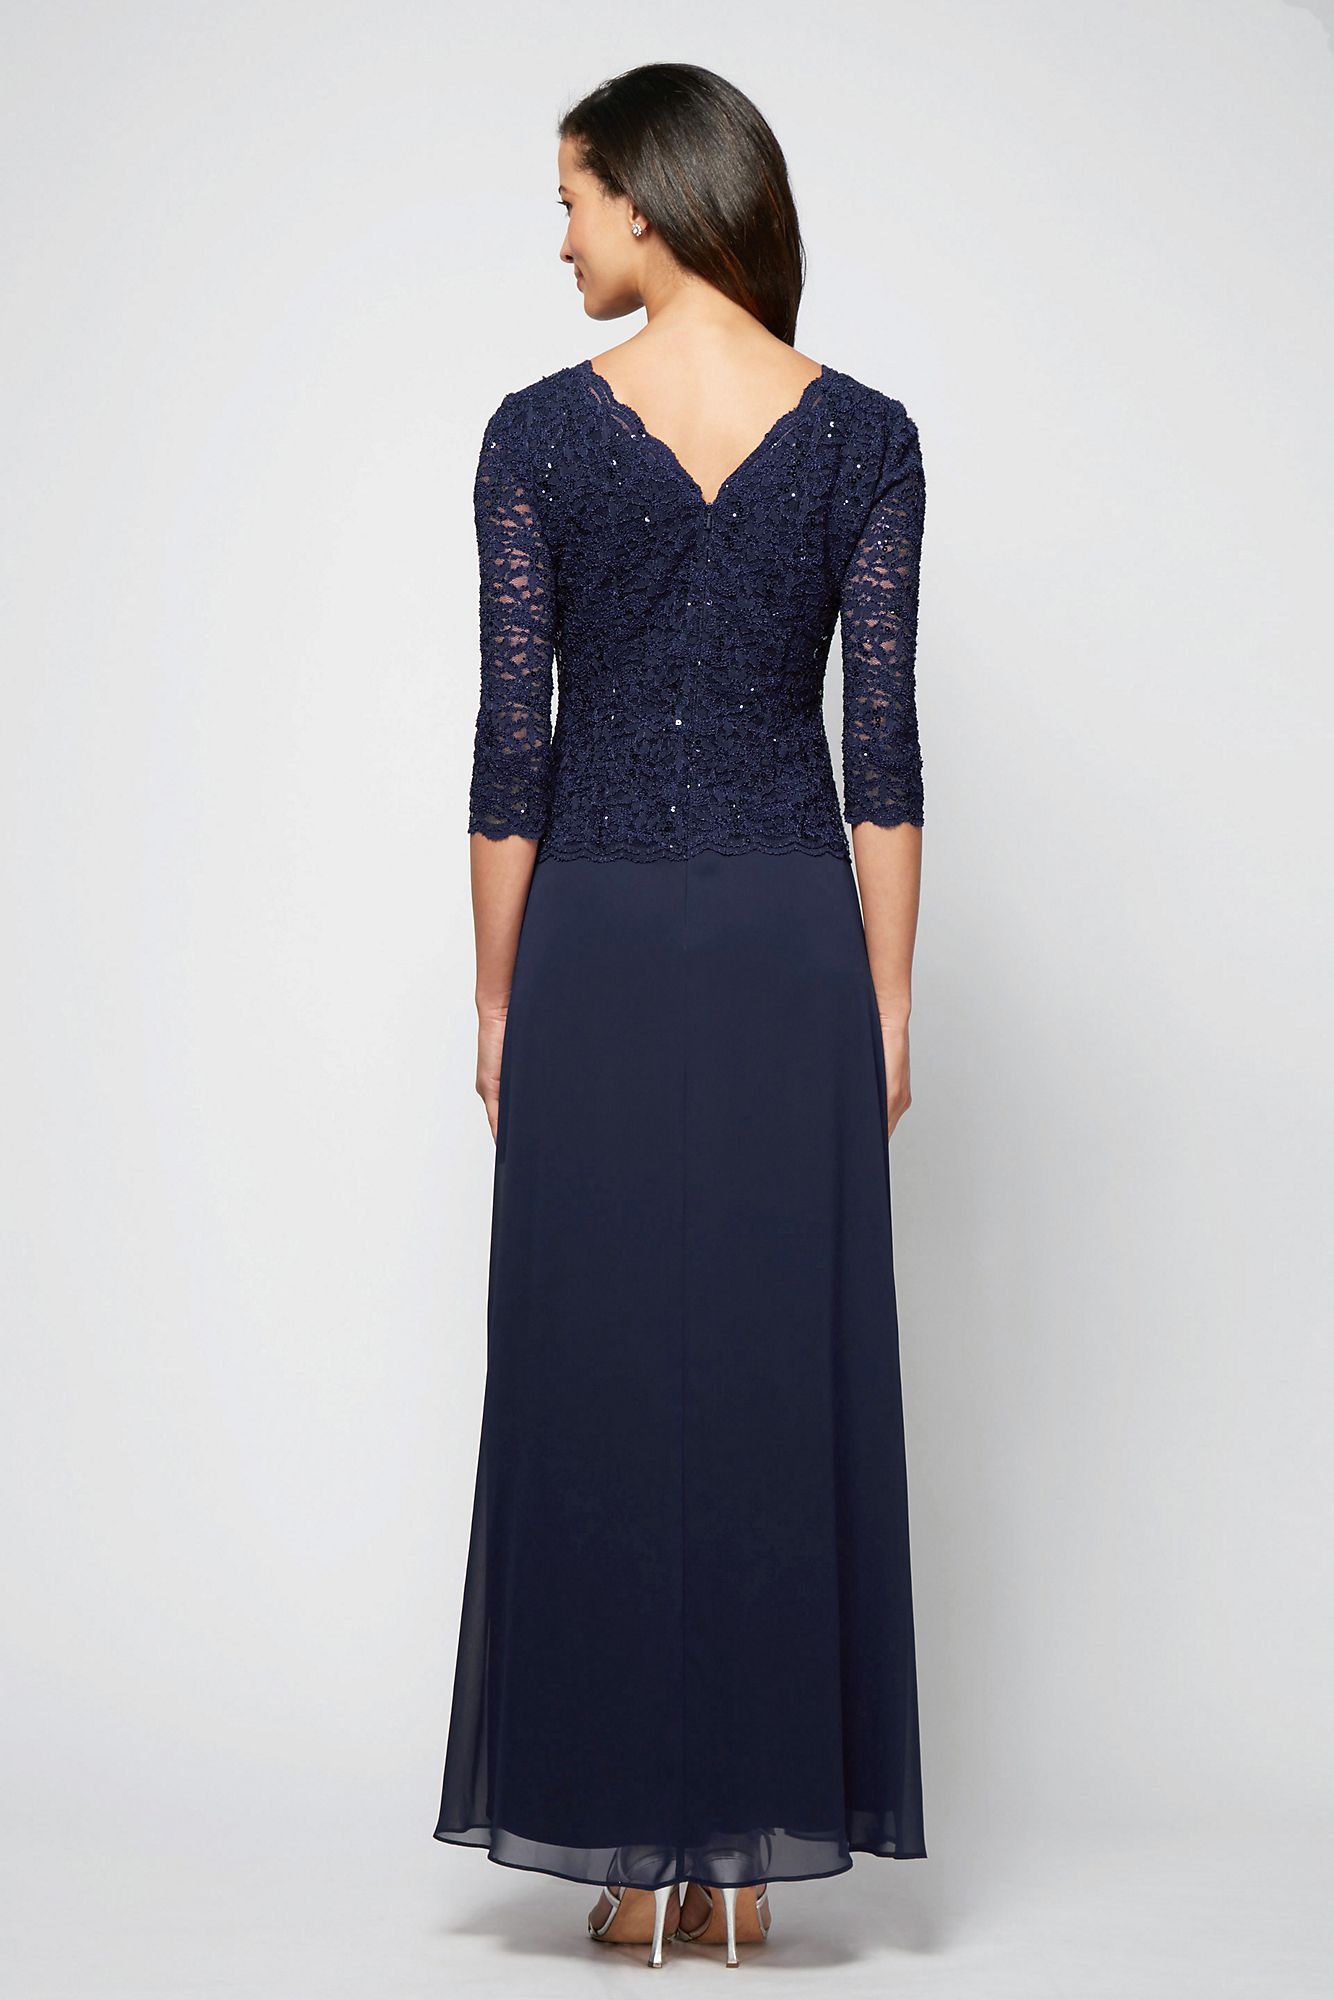 Sequin Lace 3/4 Sleeves Long Boatneck Petite Gown with V-Back 212318